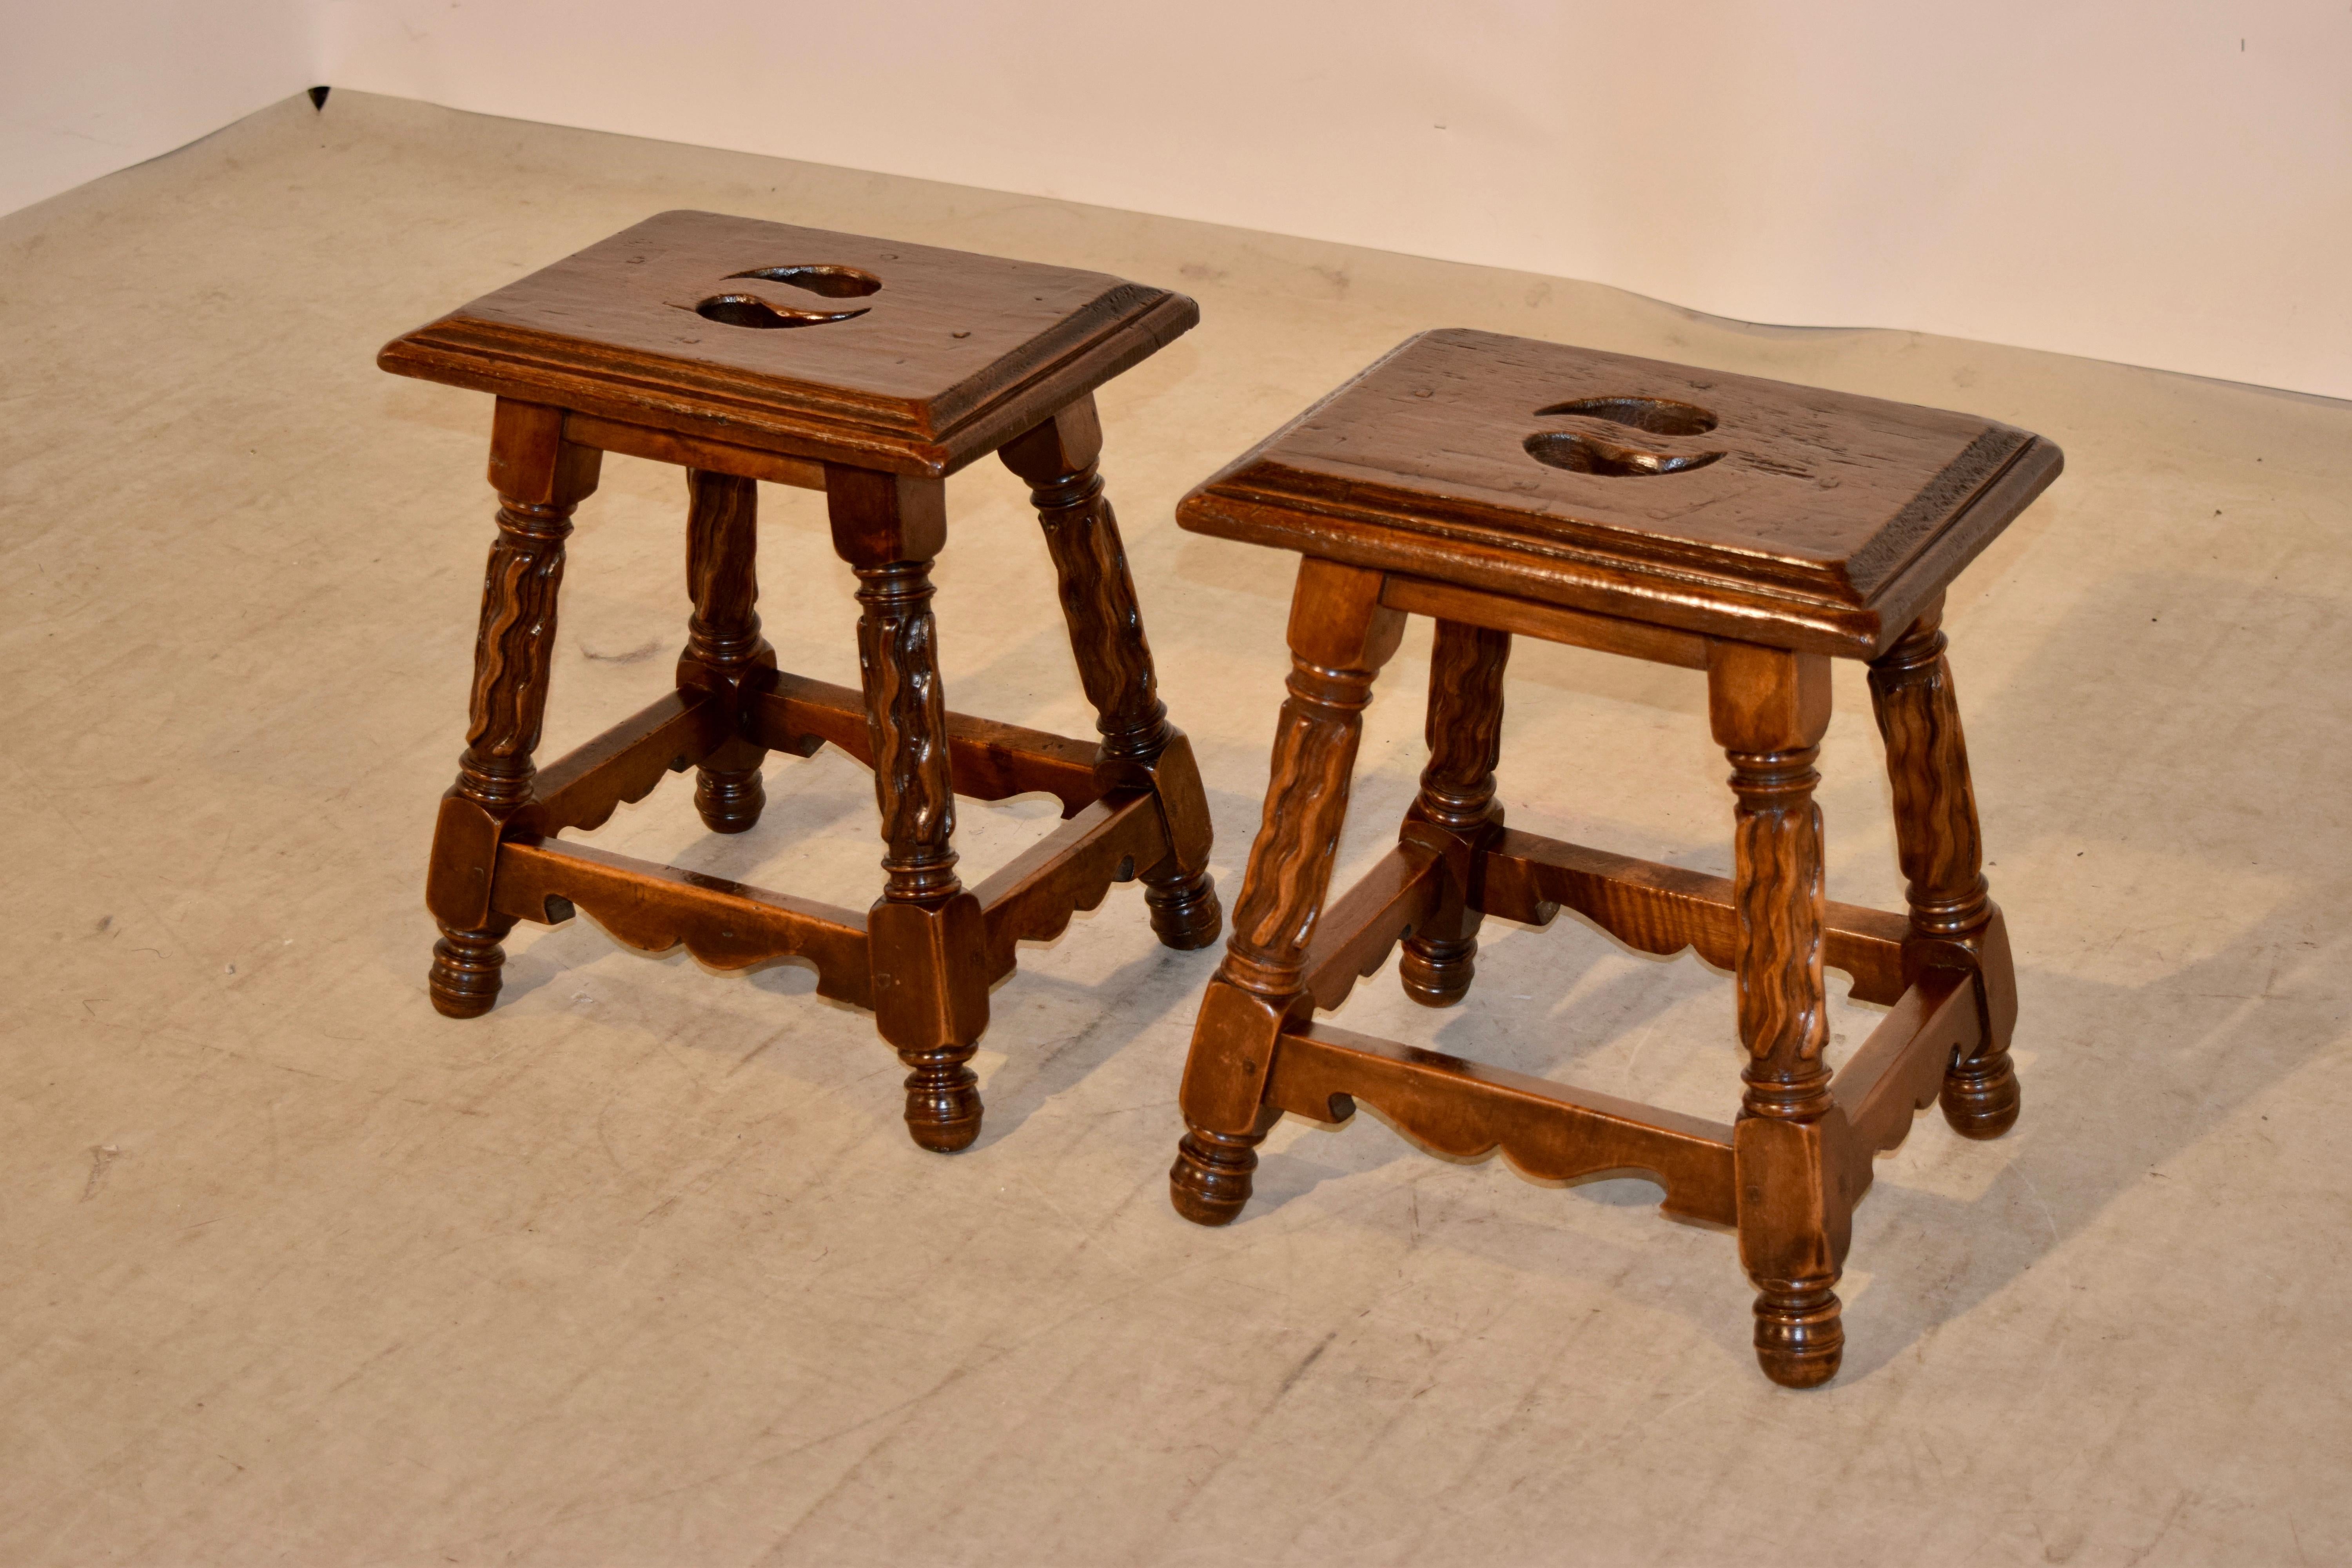 Pair of 19th century stools from France with wonderfully hand bevelled edges around the tops with cut-out handles in the centre of the seat. The aprons are simple and follow down to splayed legs which are hand-carved decorated in unusual patterns